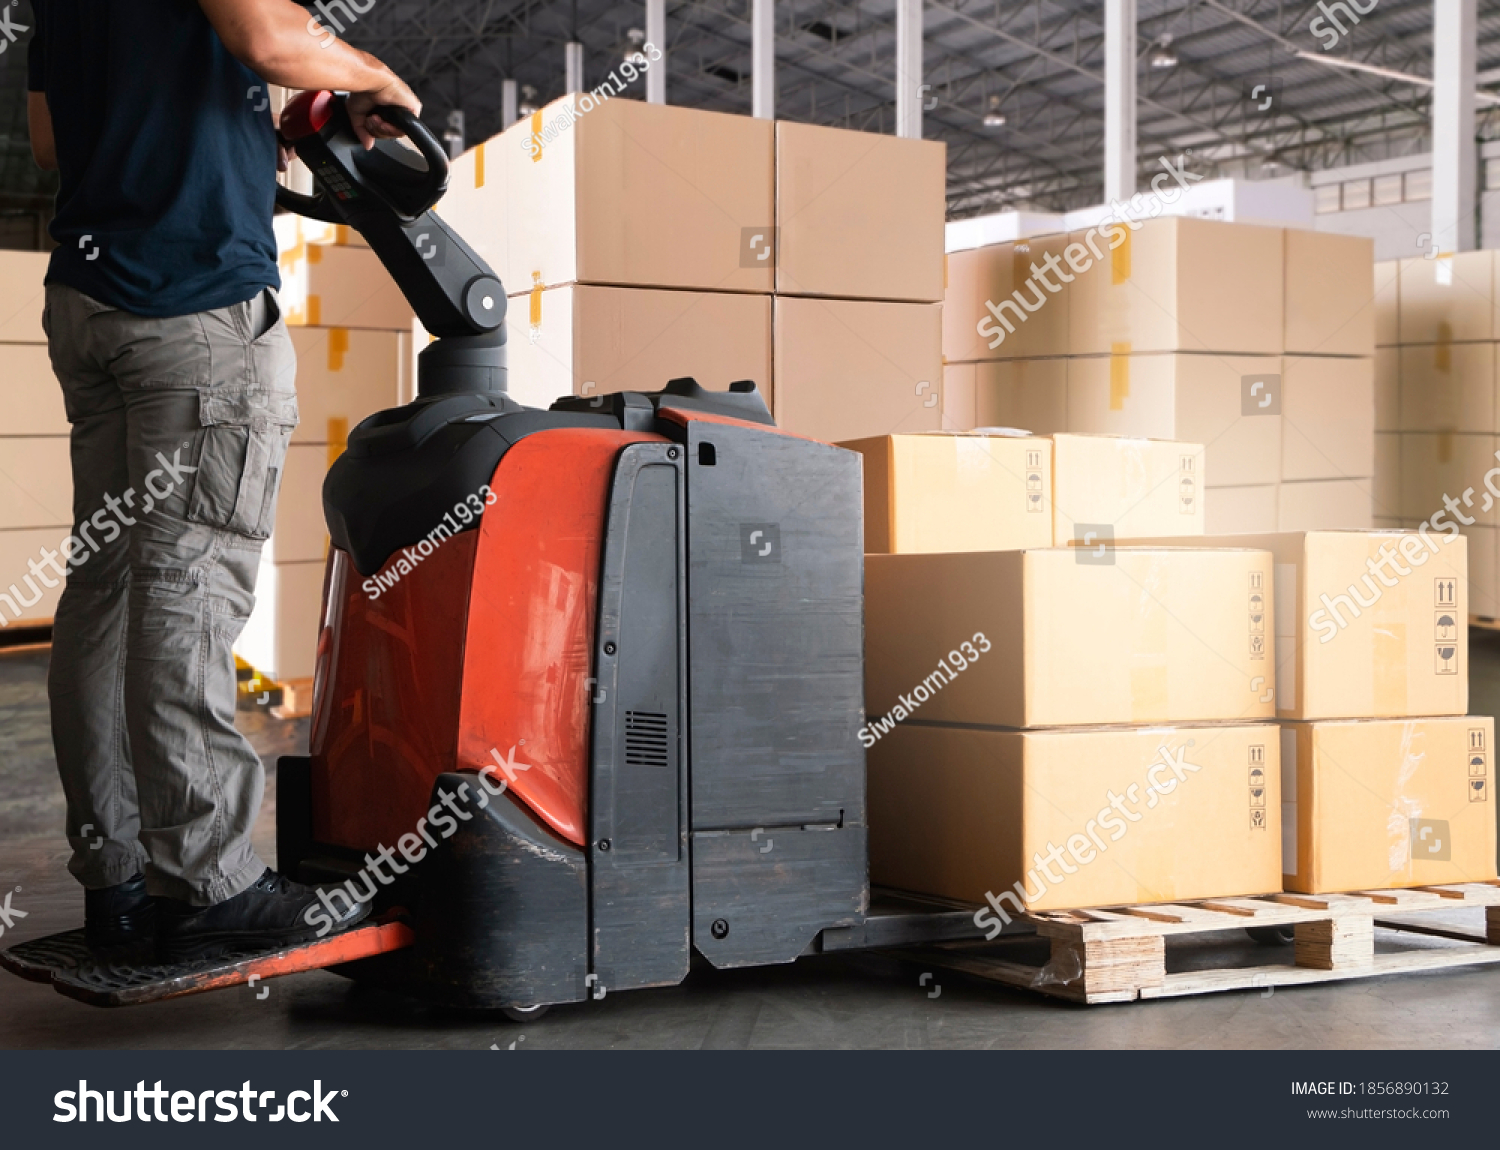 Warehouse worker working with electric forklift pallet jack unloading cardboard boxes on pallet at the warehouse.Cargo shipment boxes, Packaging, Warehousing storage. #1856890132